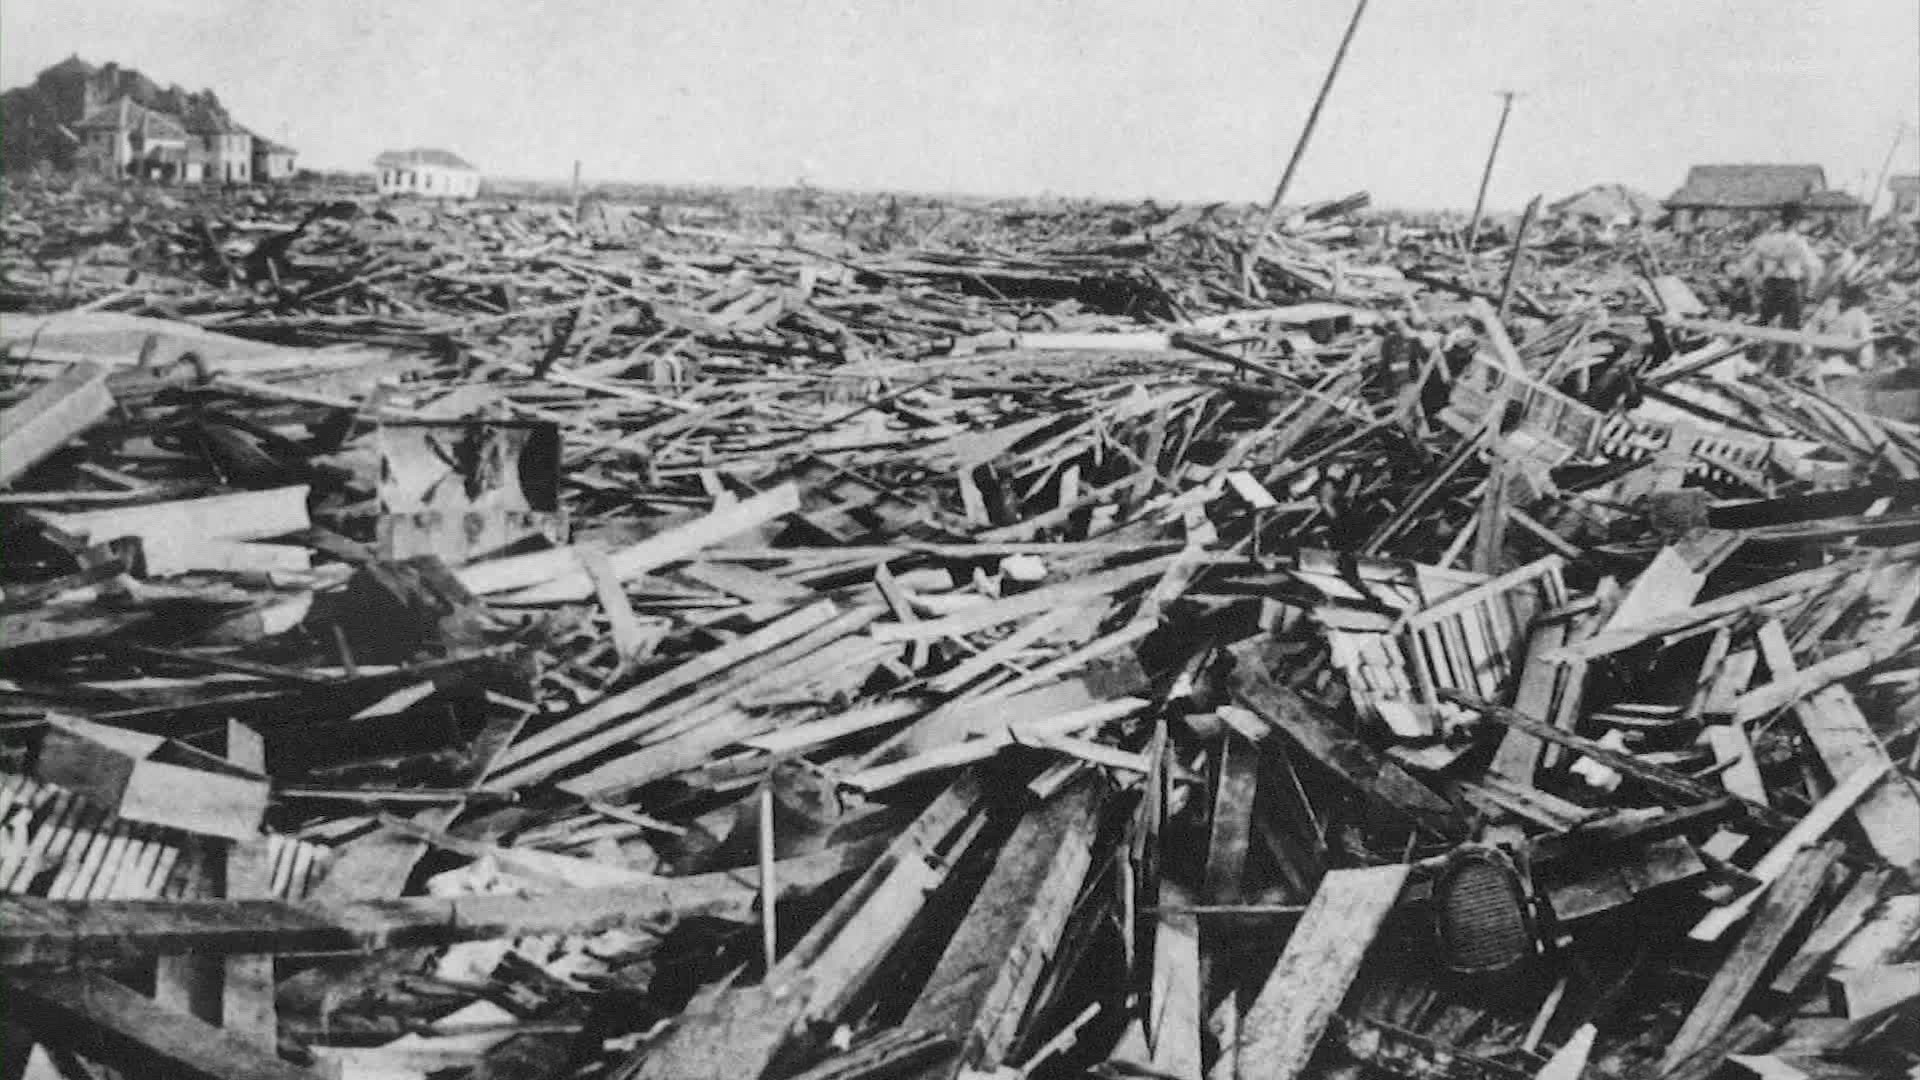 The Great Storm of 1900, the deadliest natural disaster in U.S. history, killed an estimated 12,000 people and forever changed thoughts about hurricane preparation.